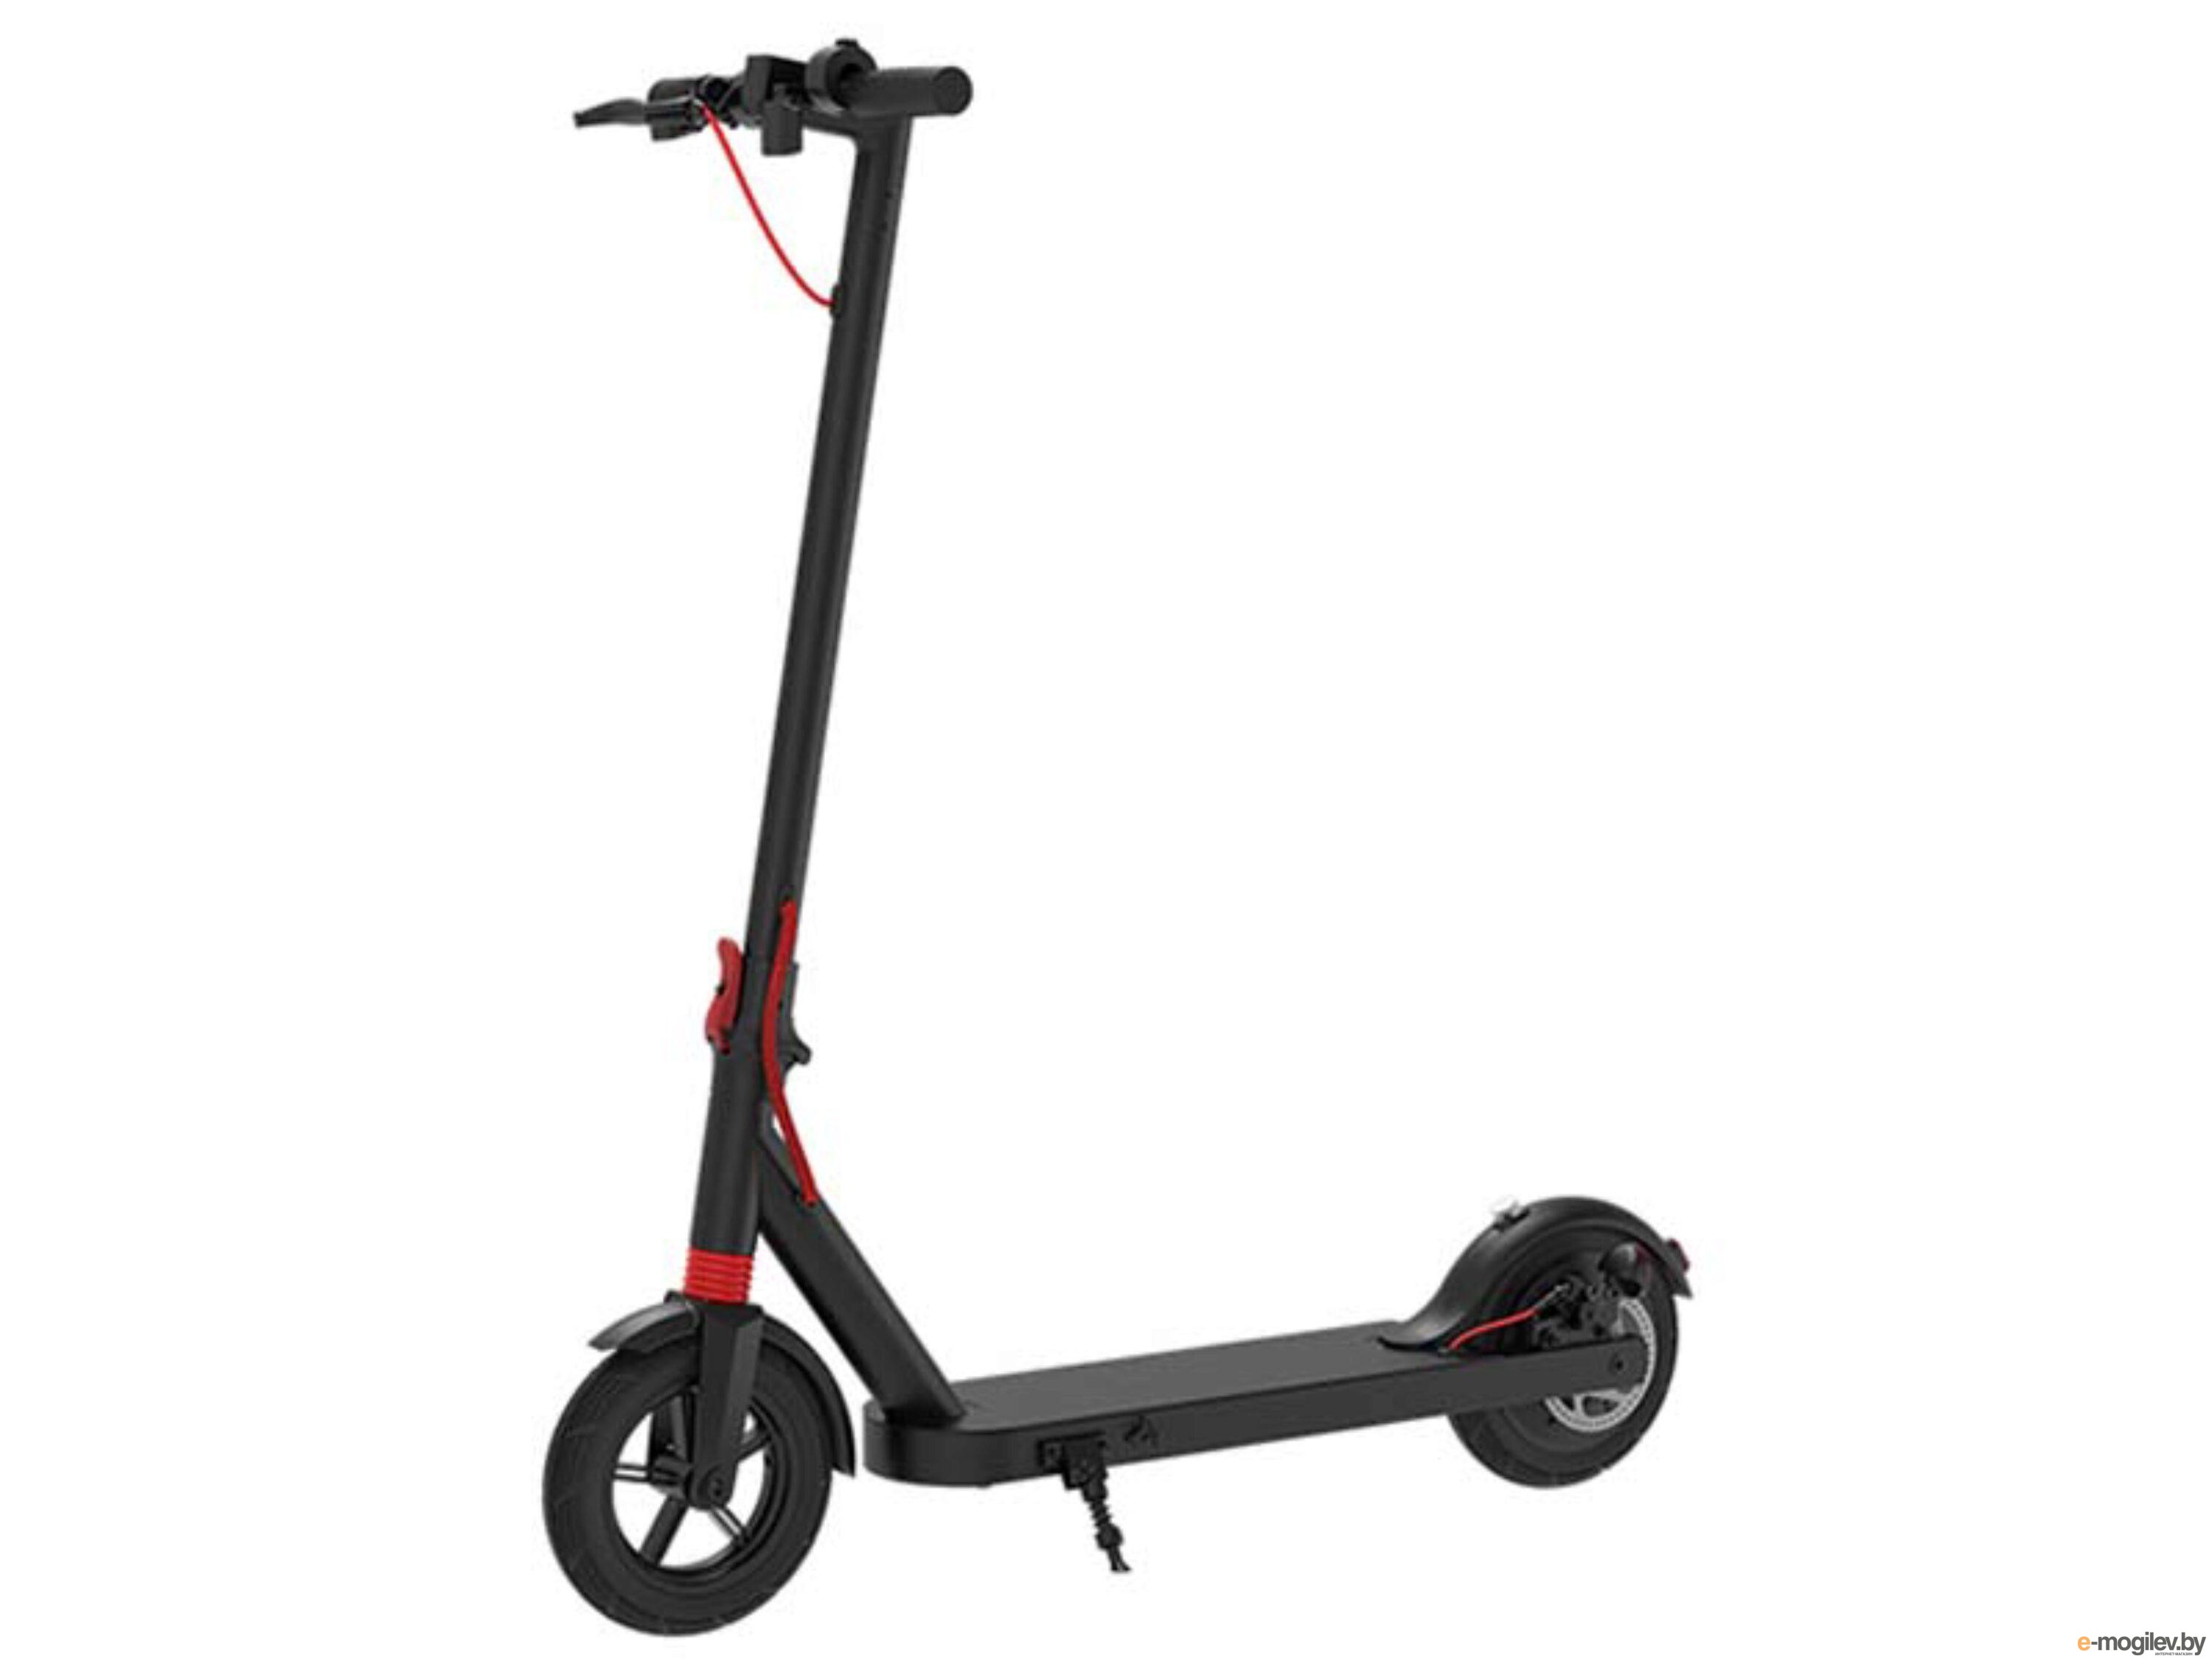 Xiaomi mijia electric scooter 1s. Электросамокат Xiaomi Mijia Electric Scooter 1s. Xiaomi Mijia 1s самокат. Электросамокат Xiaomi Mijia Electric Scooter 1s (Black/черный). Самокат Xiaomi Scooter 1s.